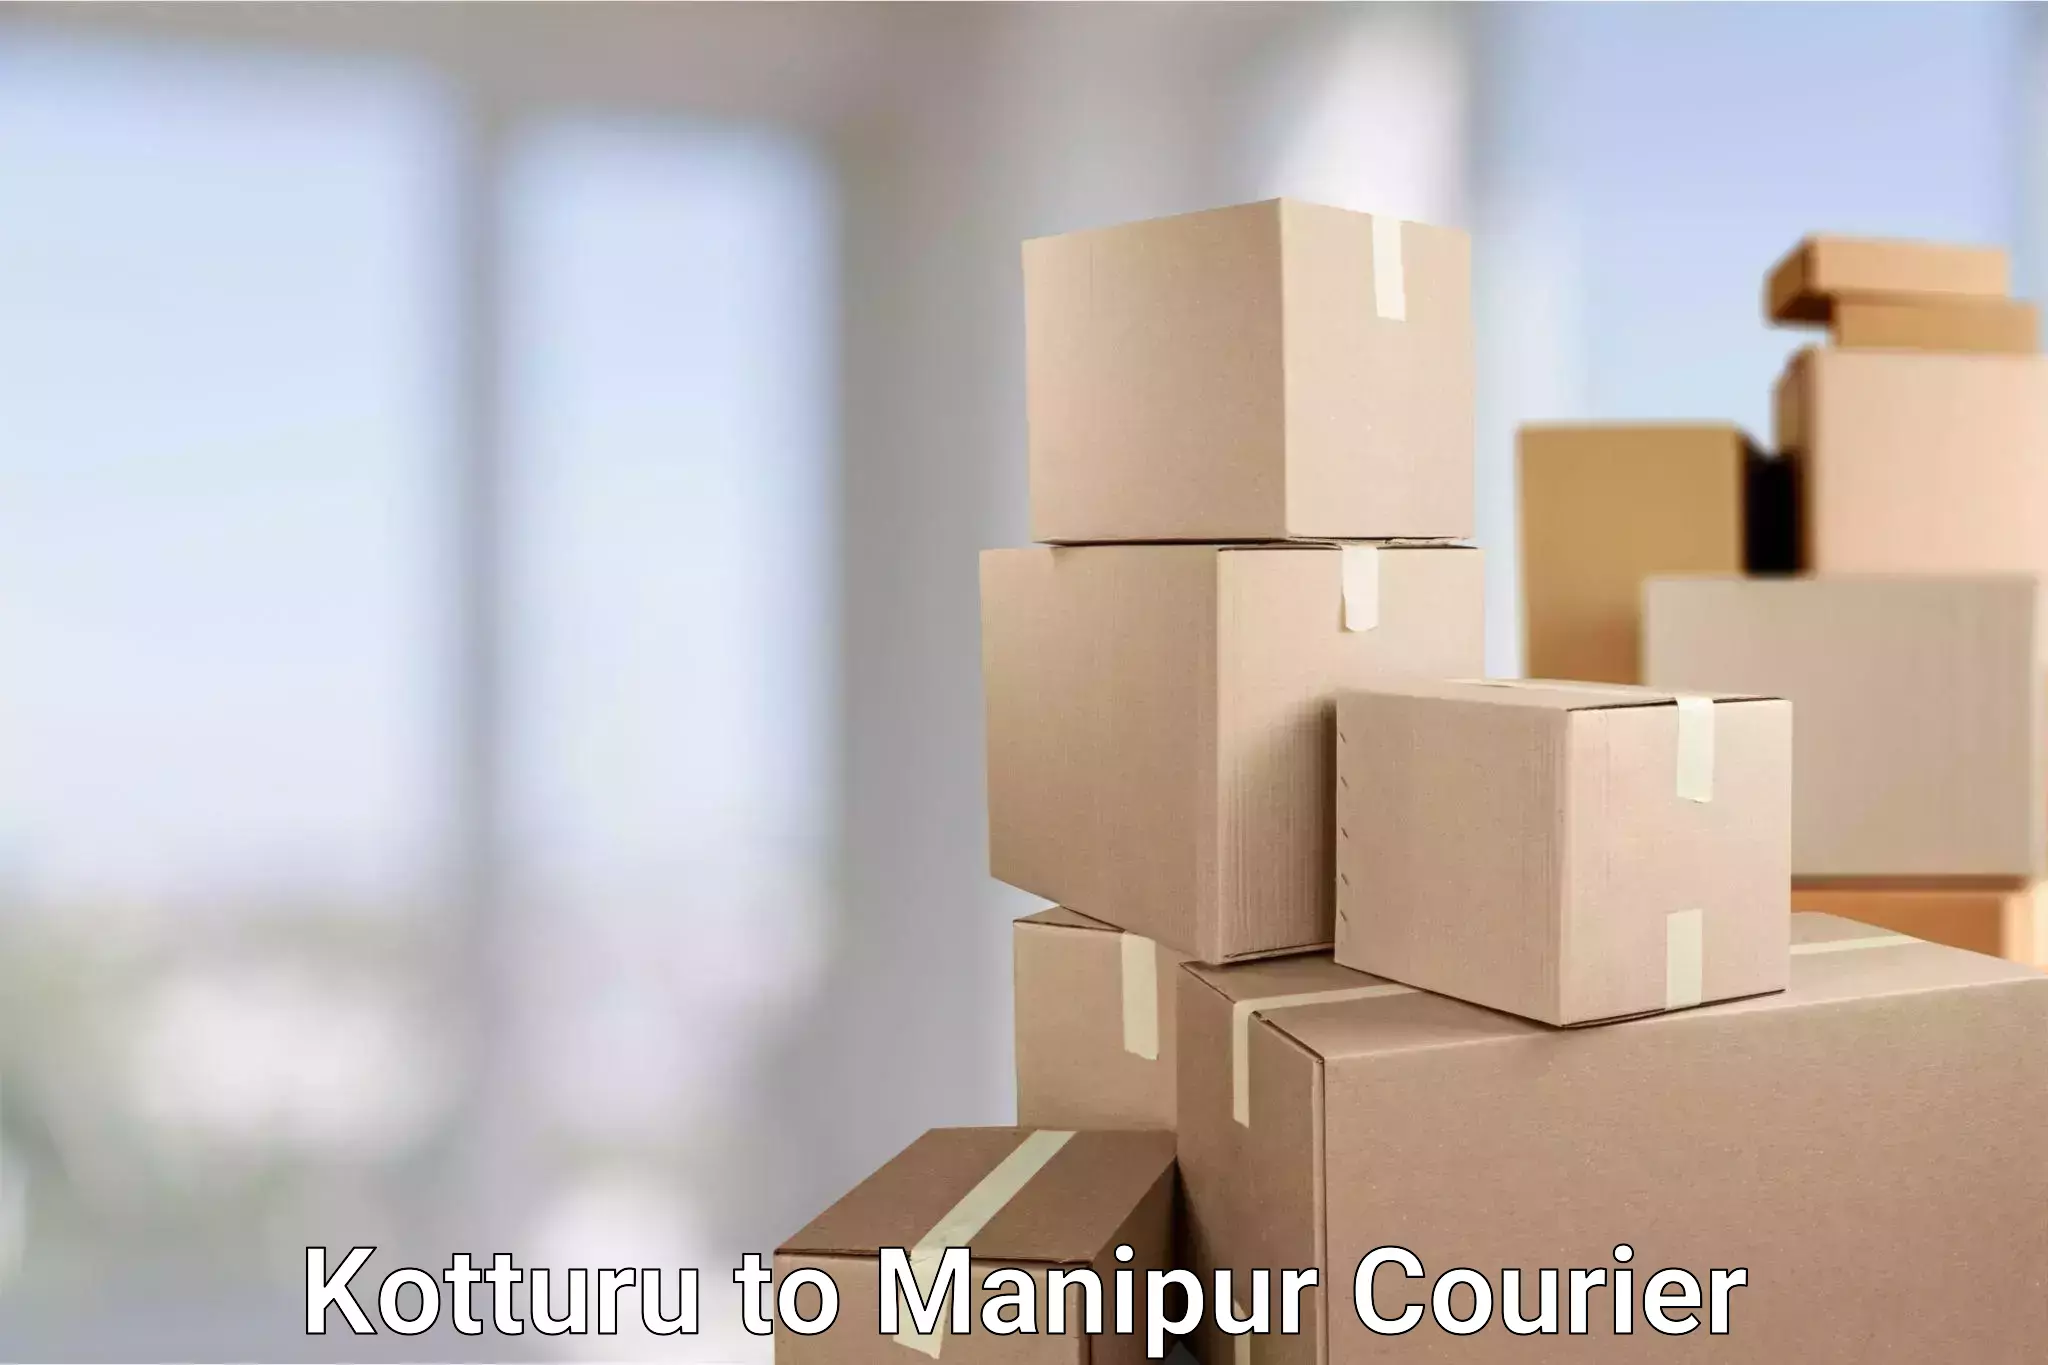 Round-the-clock parcel delivery Kotturu to Kanti